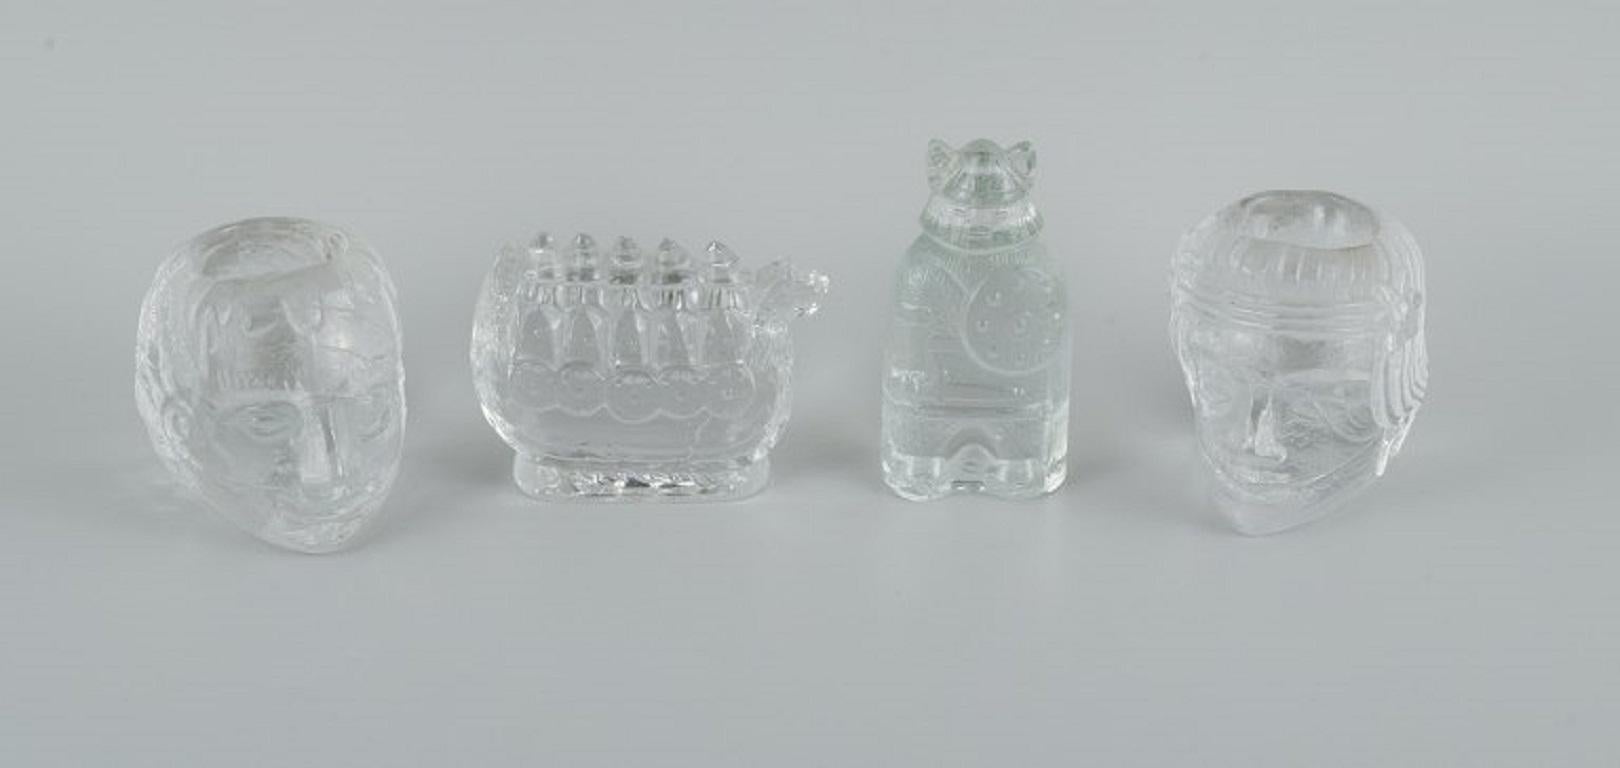 Kosta Boda, Sweden.
Four figures in art glass.
Viking, Viking ship and a pair of candle sticks with faces.
In perfect condition.
1970/80s.
The candle stick measures: H 8.5 x D 7.5 cm.